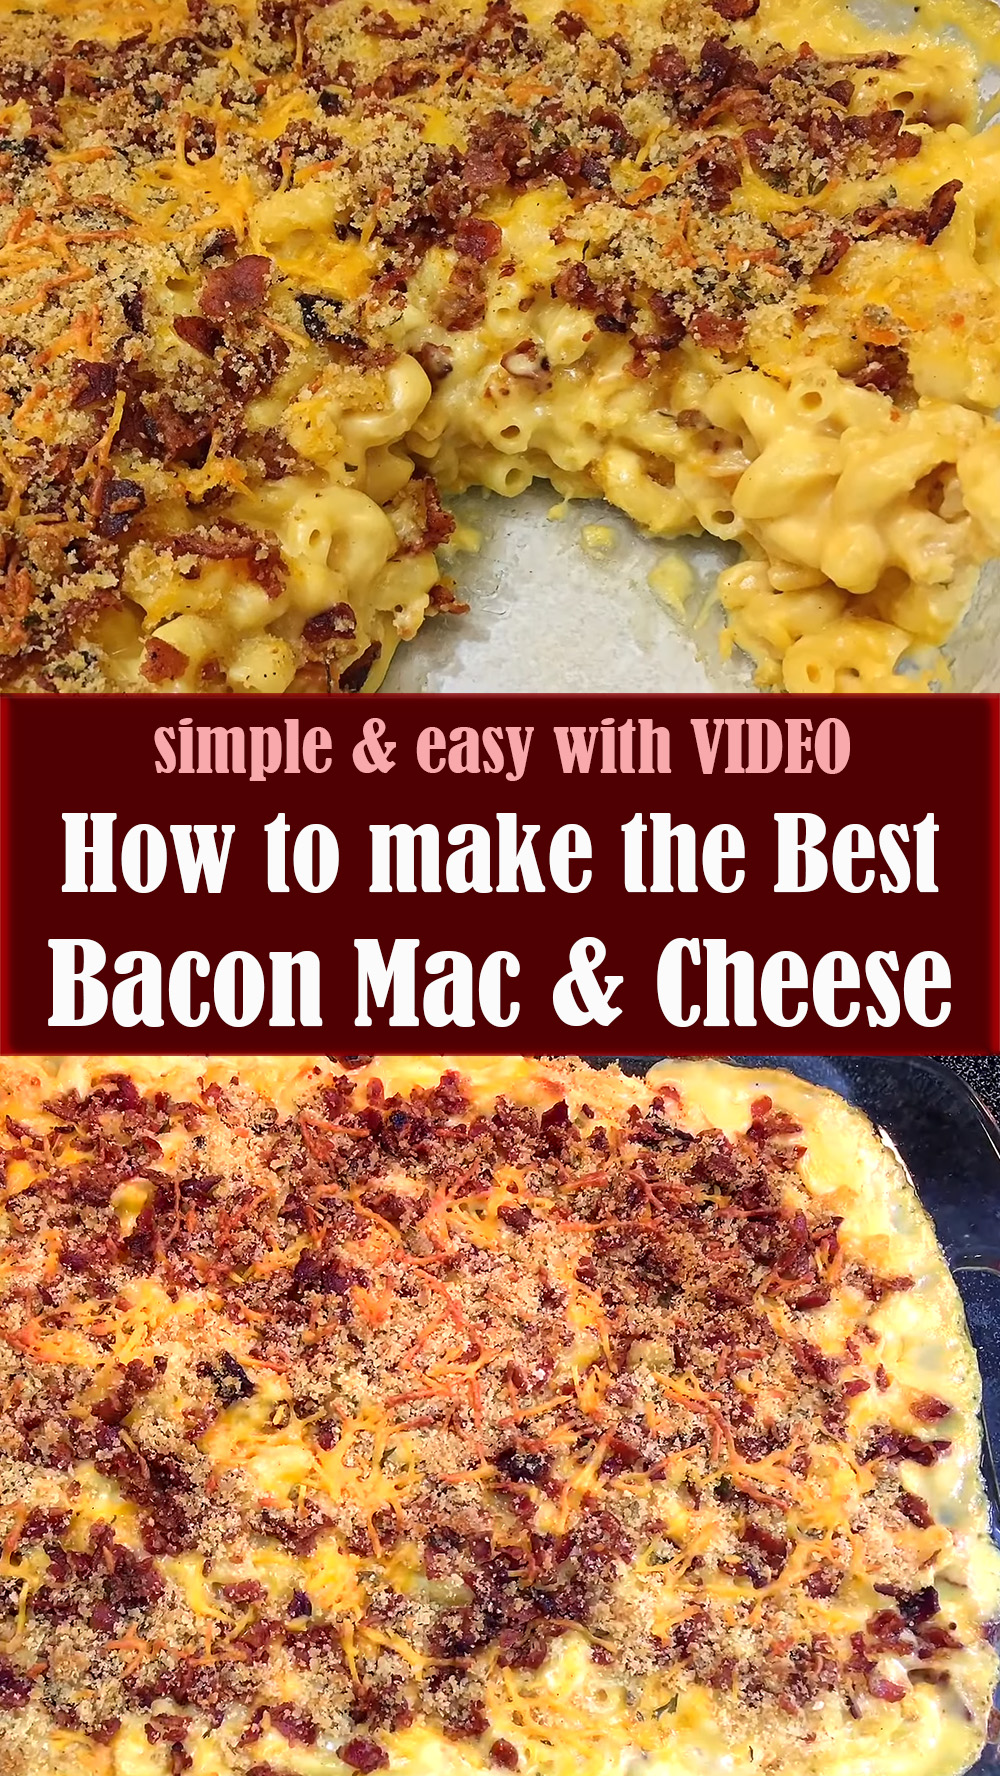 How to make the Best Bacon Mac and Cheese